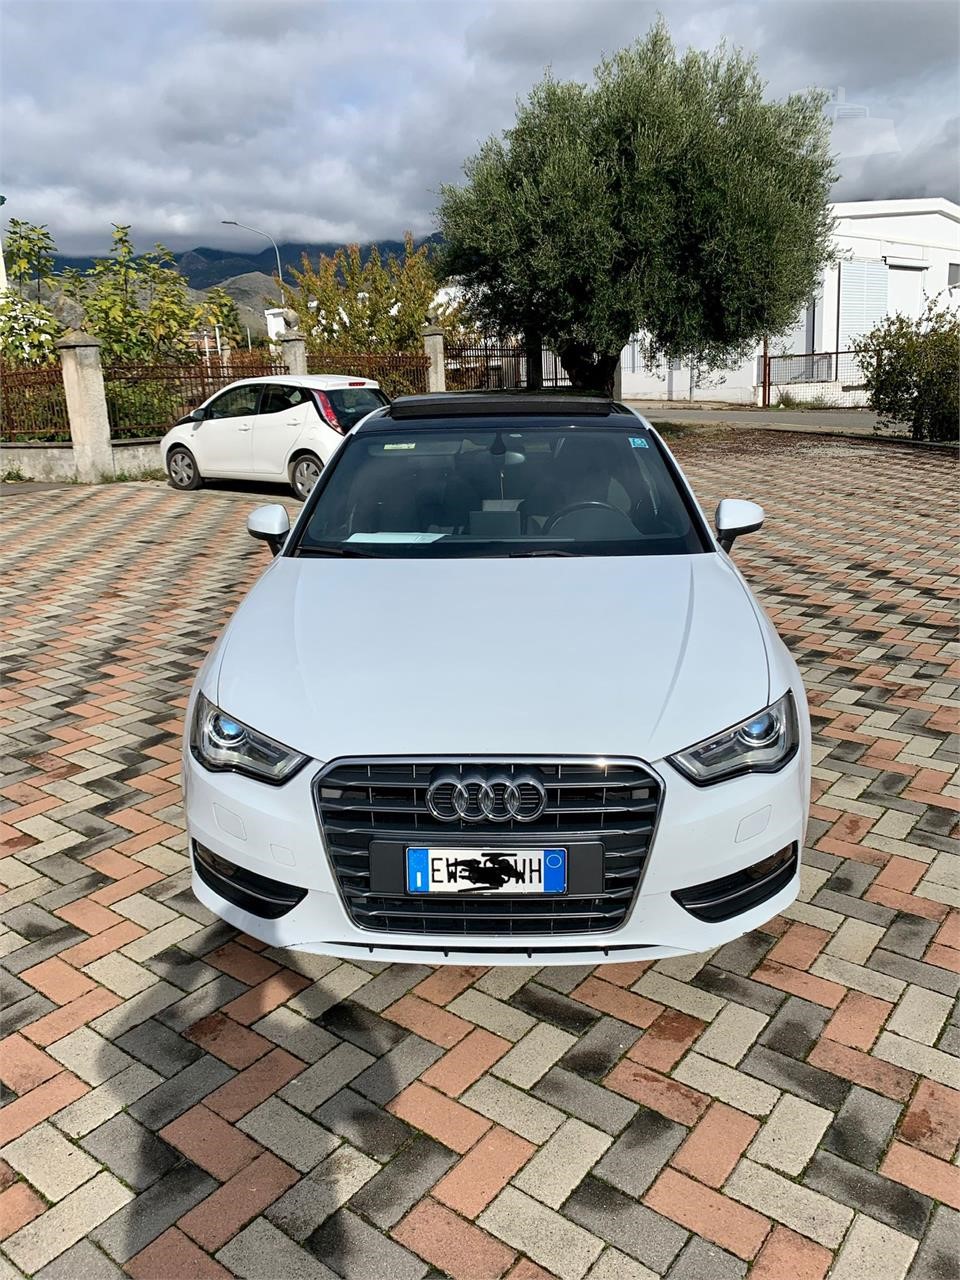 Audi A3 For Sale 2 Listings Machinerytrader Com Page 1 Of 1